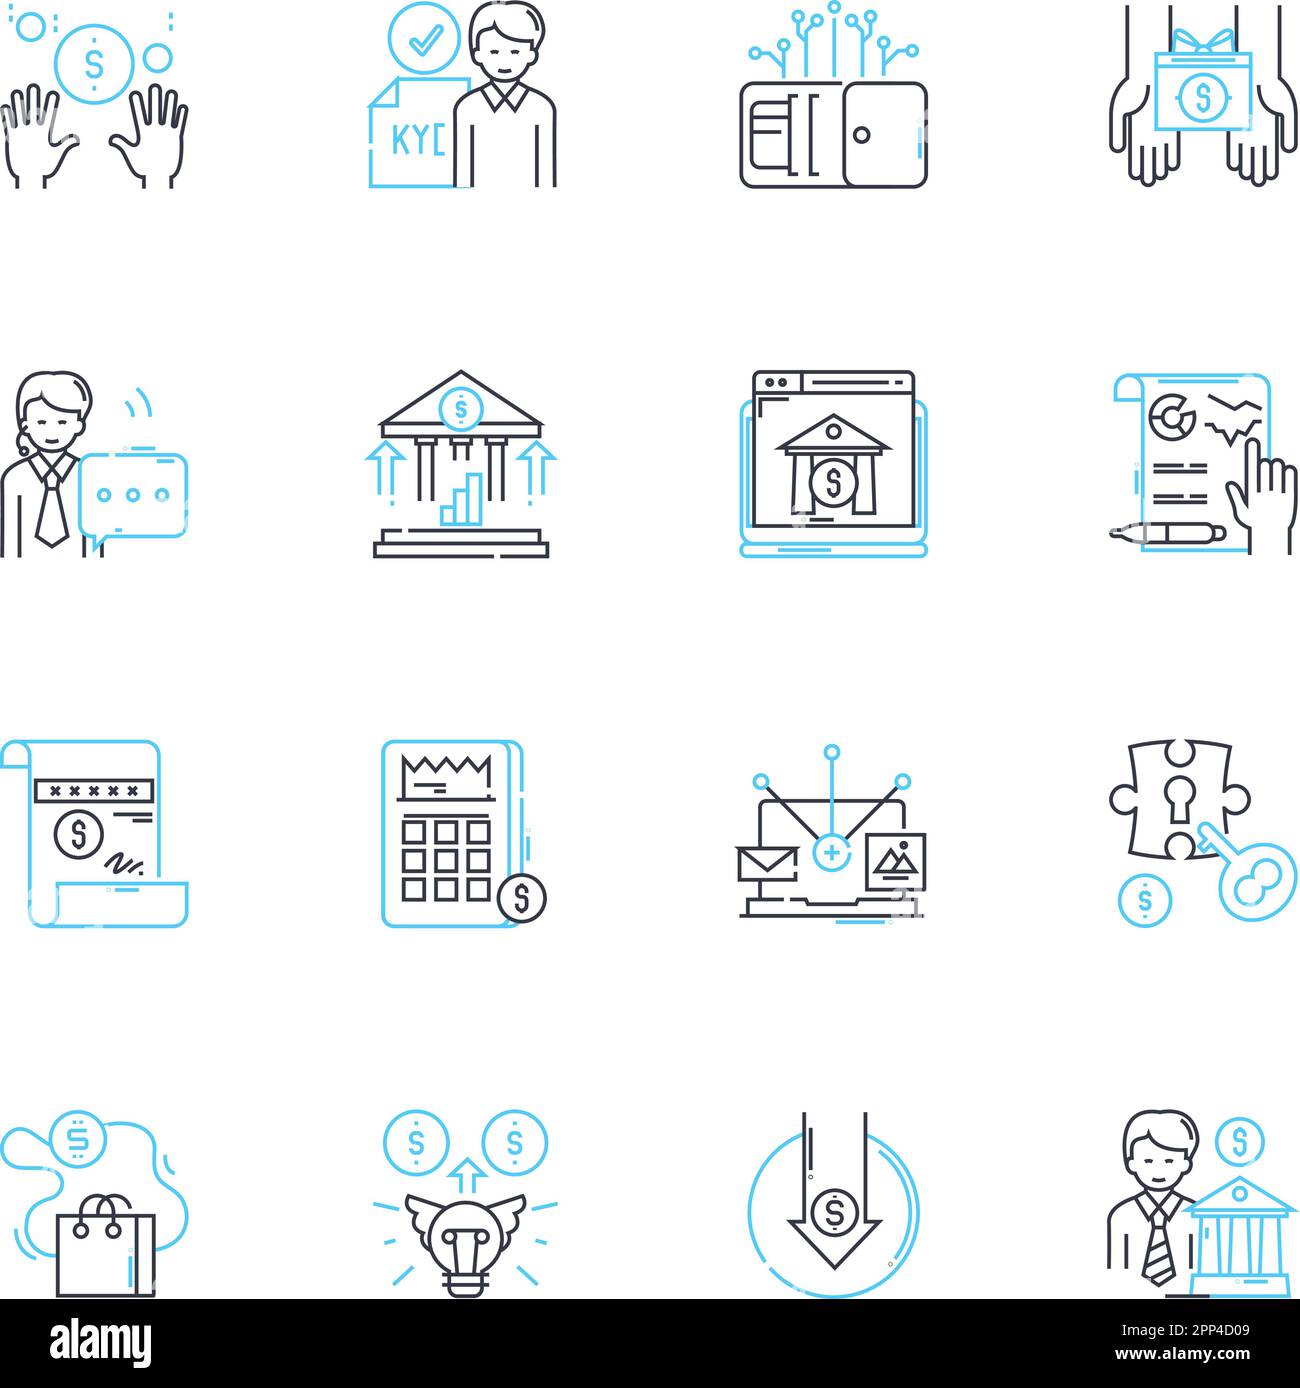 Credit services linear icons set. Credirthiness, Credit score, Credit report, Credit repair, Debt consolidation, Credit counseling, Credit monitoring Stock Vector